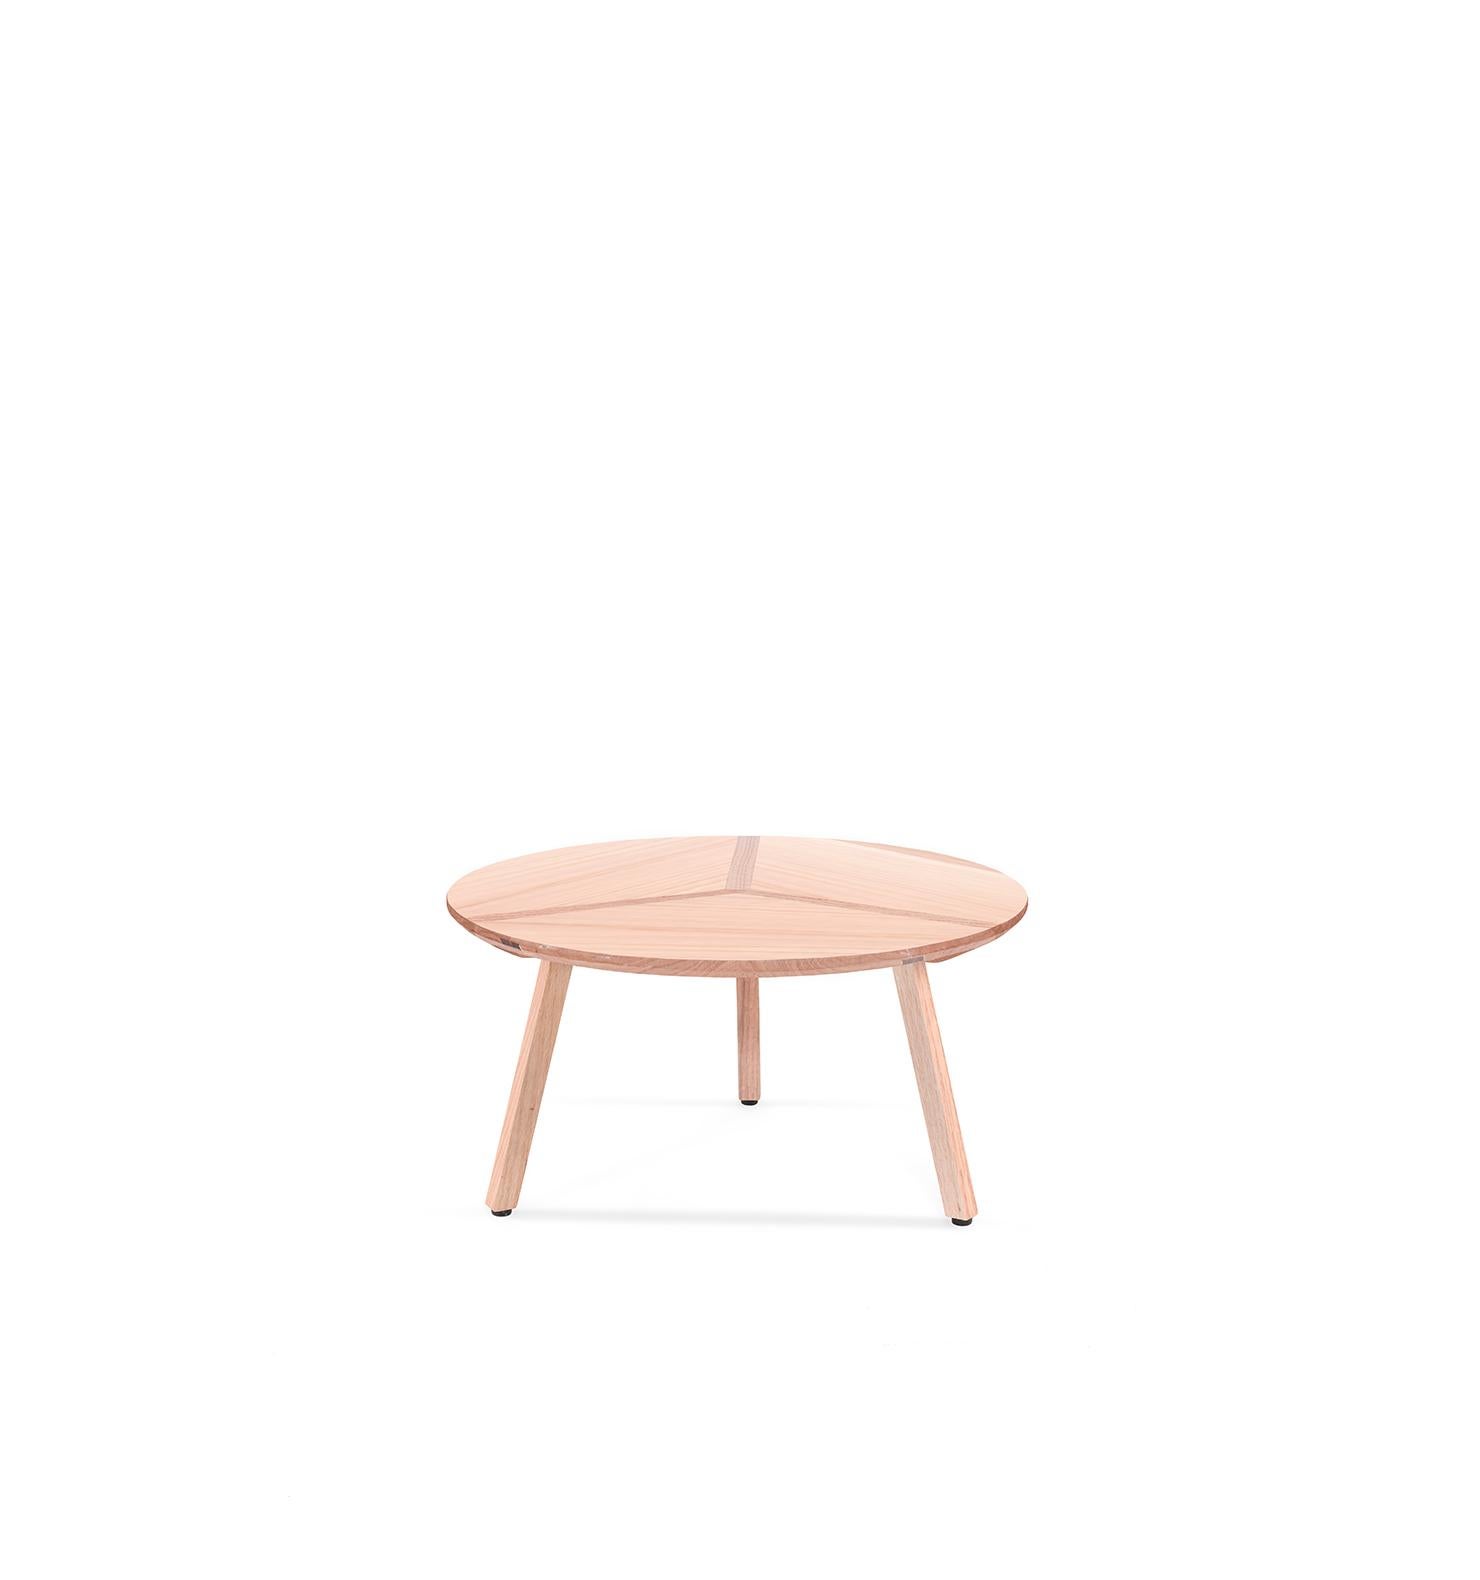 Circuito 60 is a stunning Mexican contemporary table designed by Emiliano Molina for CUCHARA. The table is a true masterpiece of woodcraft, featuring stunning assemblies that make it stand out from the crowd. It is a timeless piece characterized by